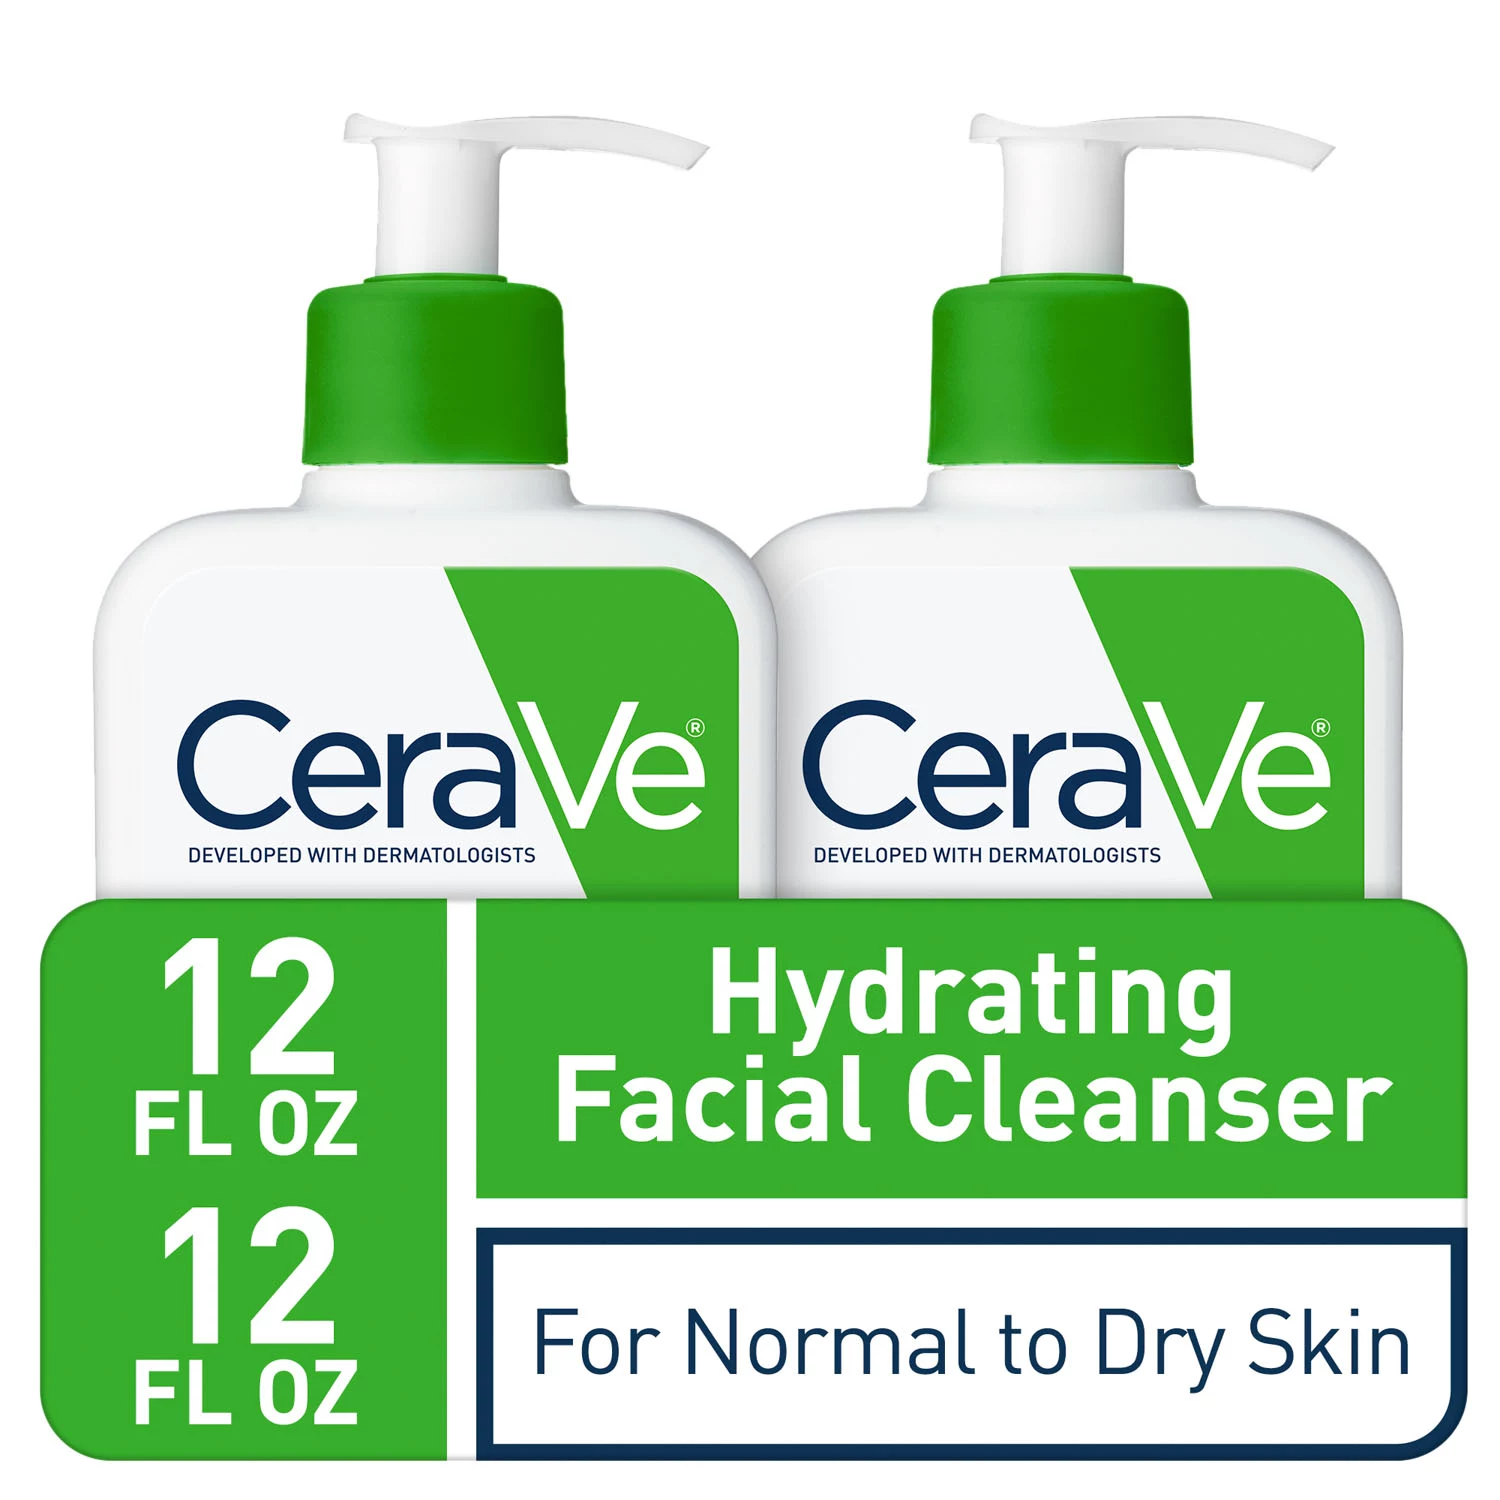 CeraVe Gentle Hydrating Facial Cleanser (12 oz., 2 pk.)